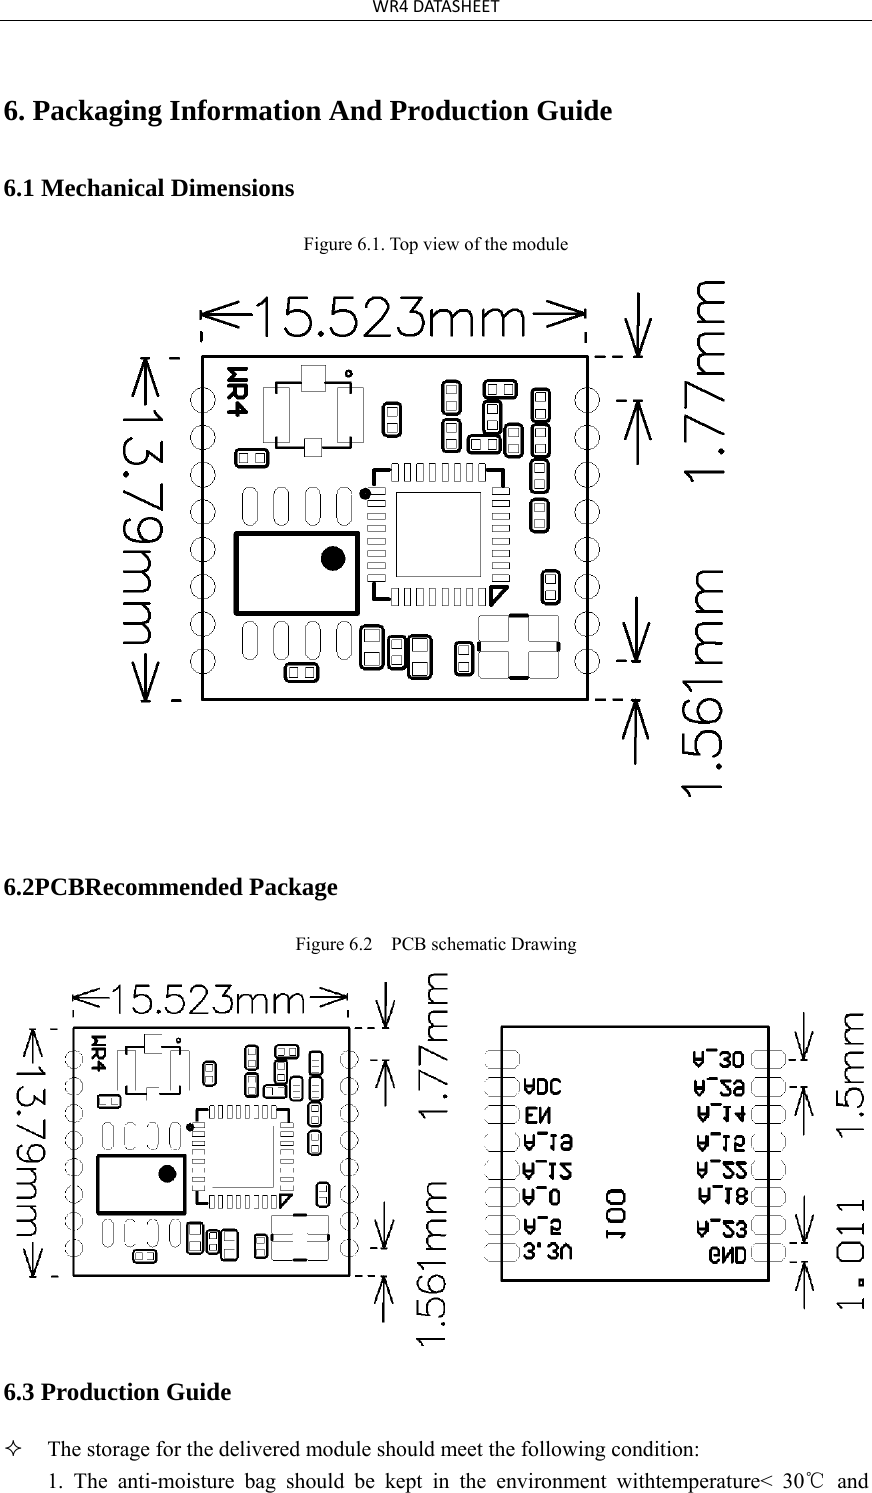 WR4DATASHEET6. Packaging Information And Production Guide6.1 Mechanical Dimensions Figure 6.1. Top view of the module 6.2PCBRecommended Package Figure 6.2    PCB schematic Drawing 6.3 Production Guide The storage for the delivered module should meet the following condition:1. The anti-moisture bag should be kept in the environment withtemperature&lt; 30℃ and